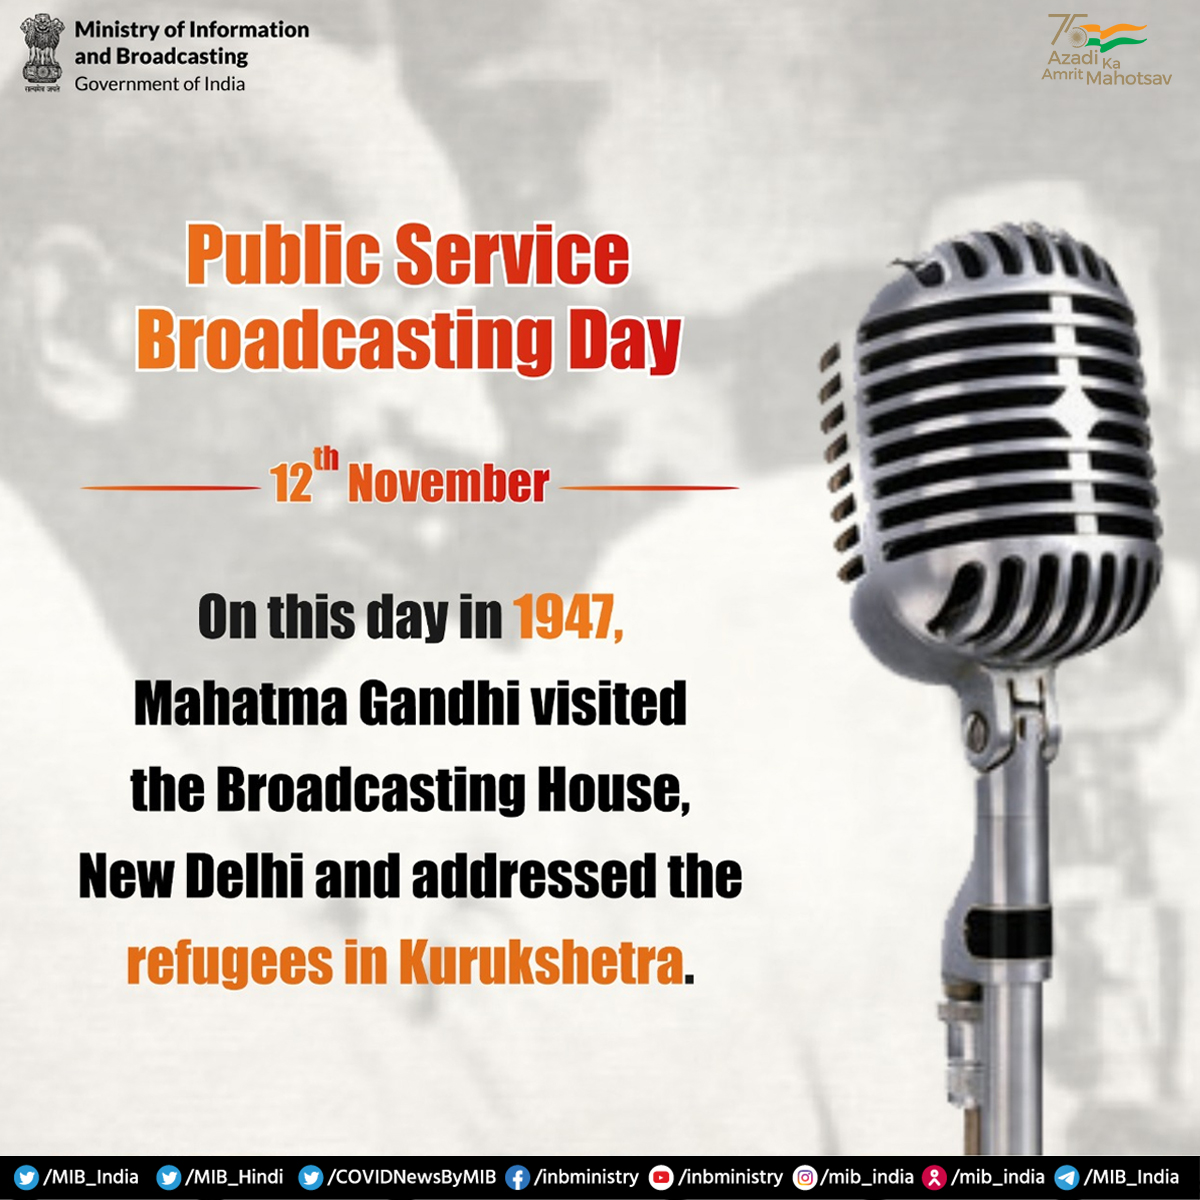 #MahatamaGandhi utilized various forms of media to address the masses & radio was one such medium.

To commemorate #Gandhiji's visit to #BroadcastingHouse, New Delhi on this day in 1947, #PublicServiceBroadcastingDay is celebrated on November 12.

#BroadcastingDay #AmritMahotsav